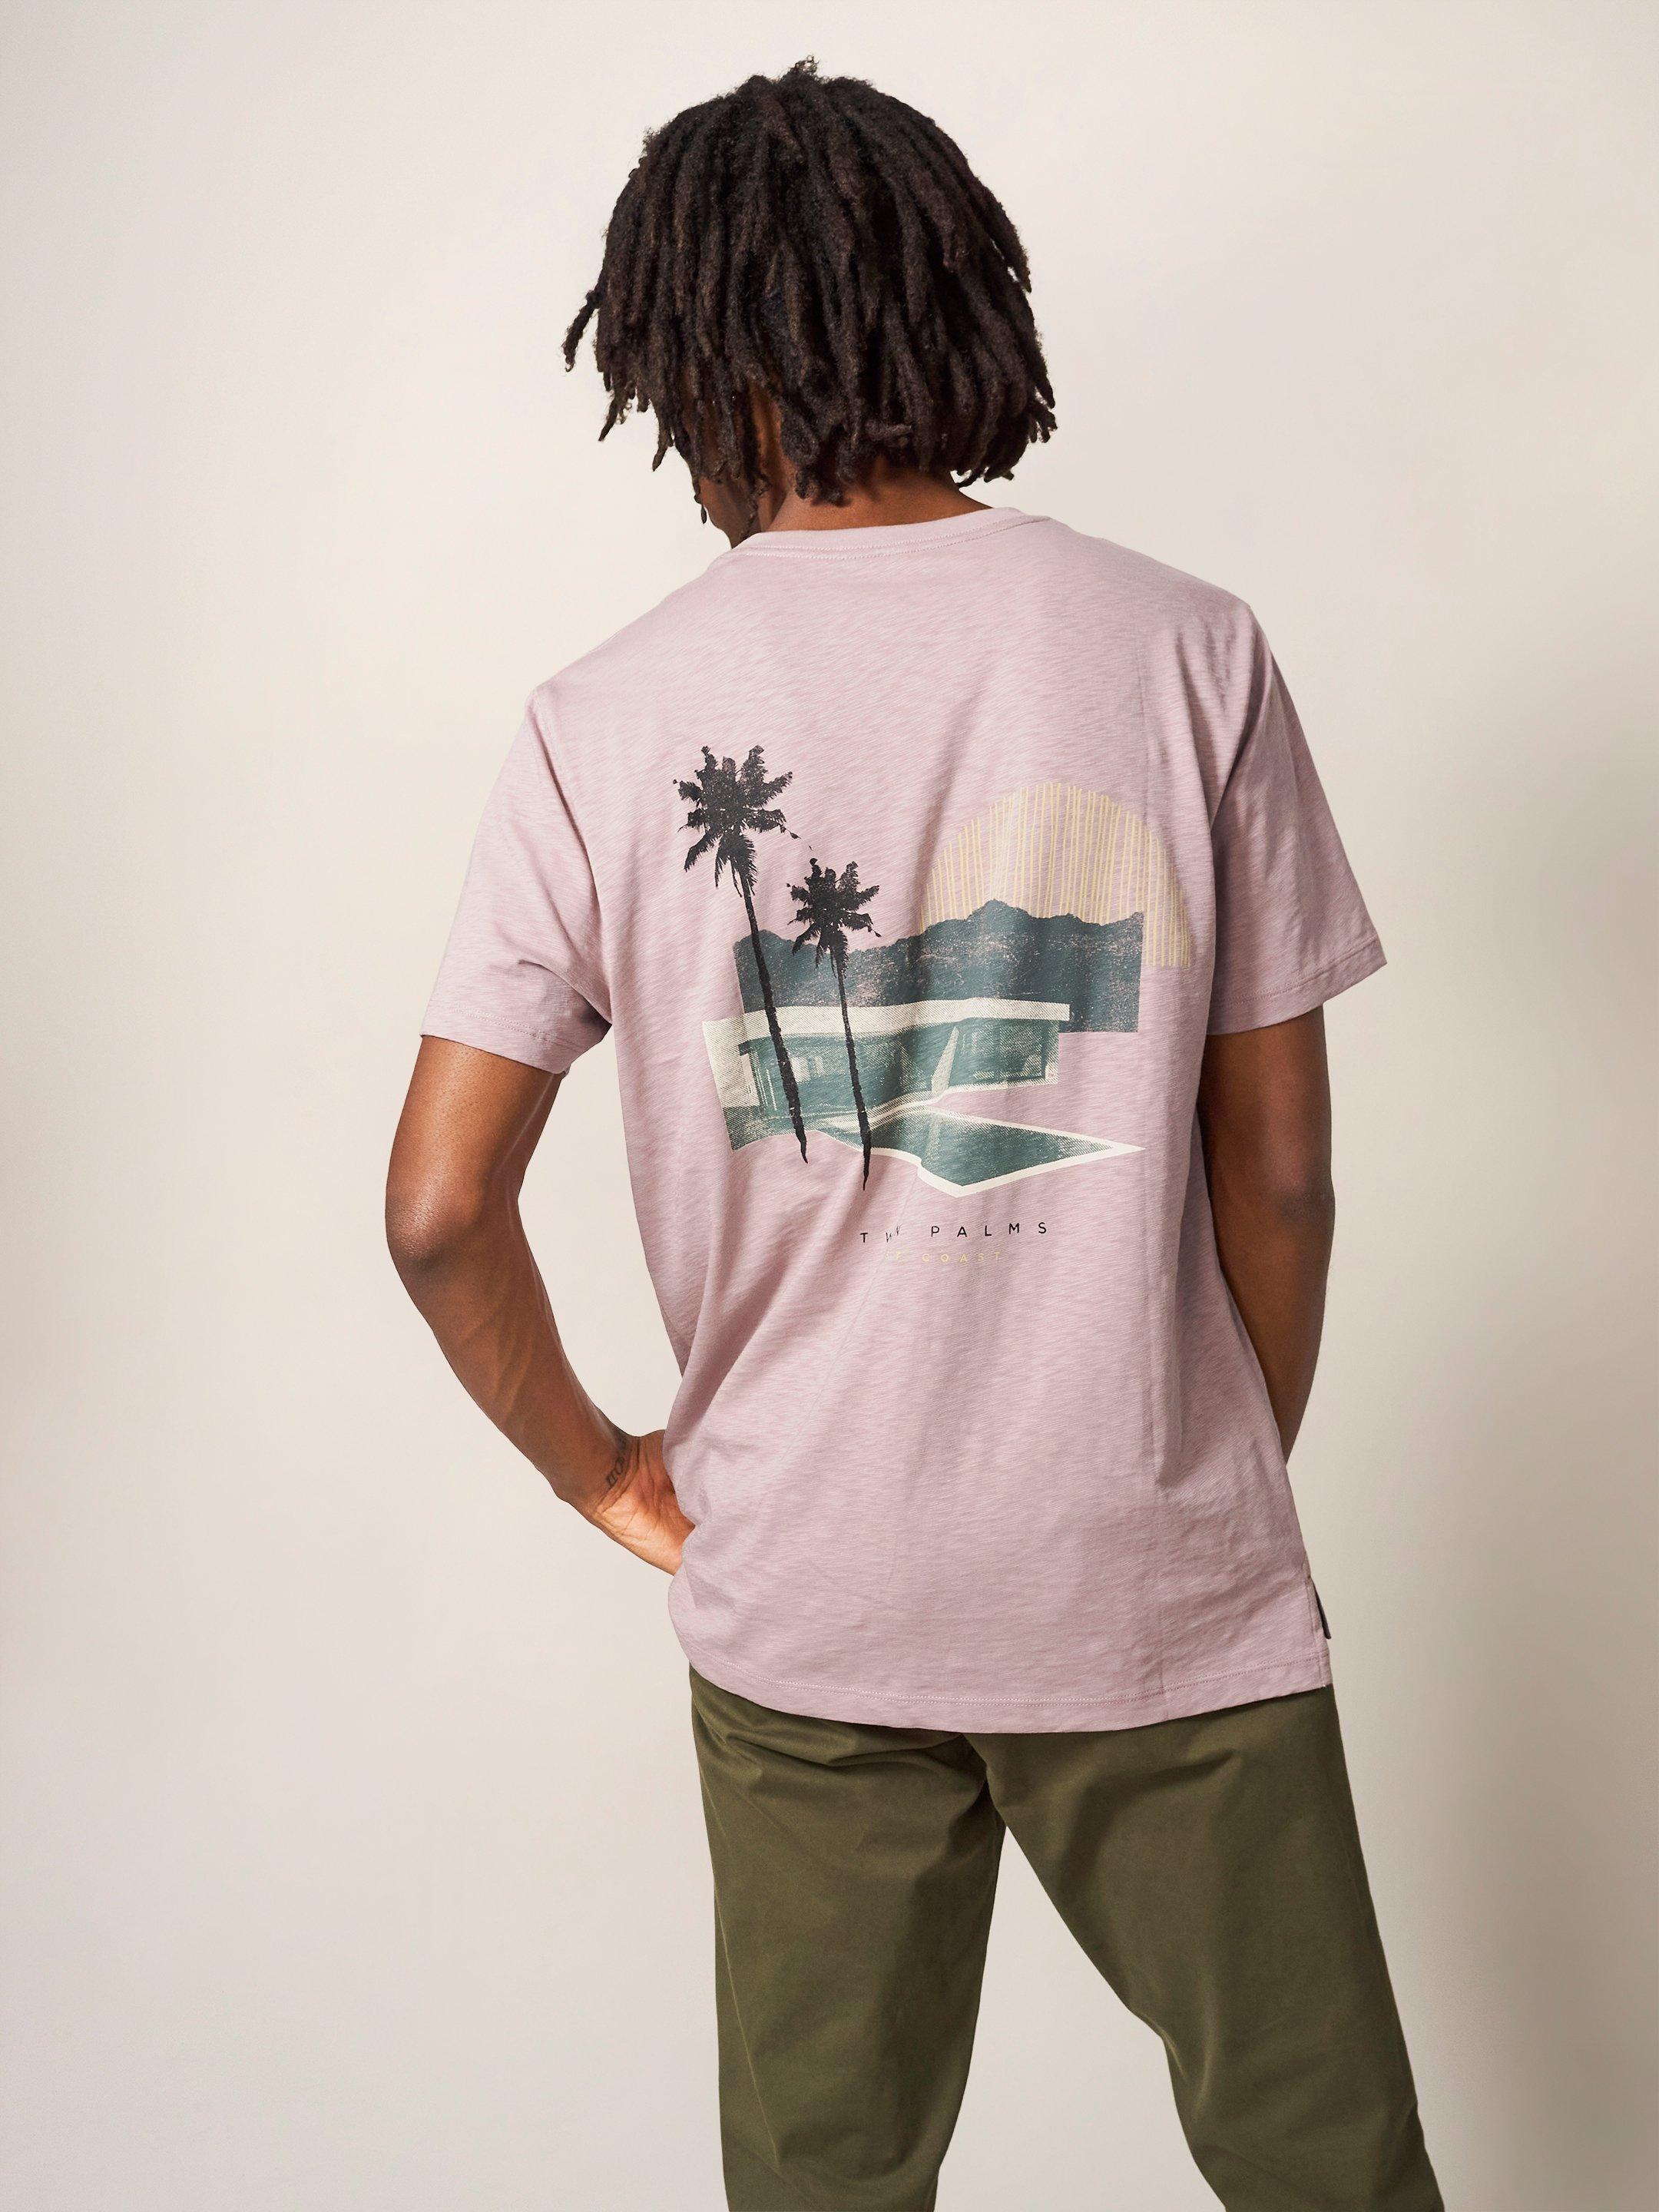 West Coast Graphic Tee in DUS PINK - MODEL BACK